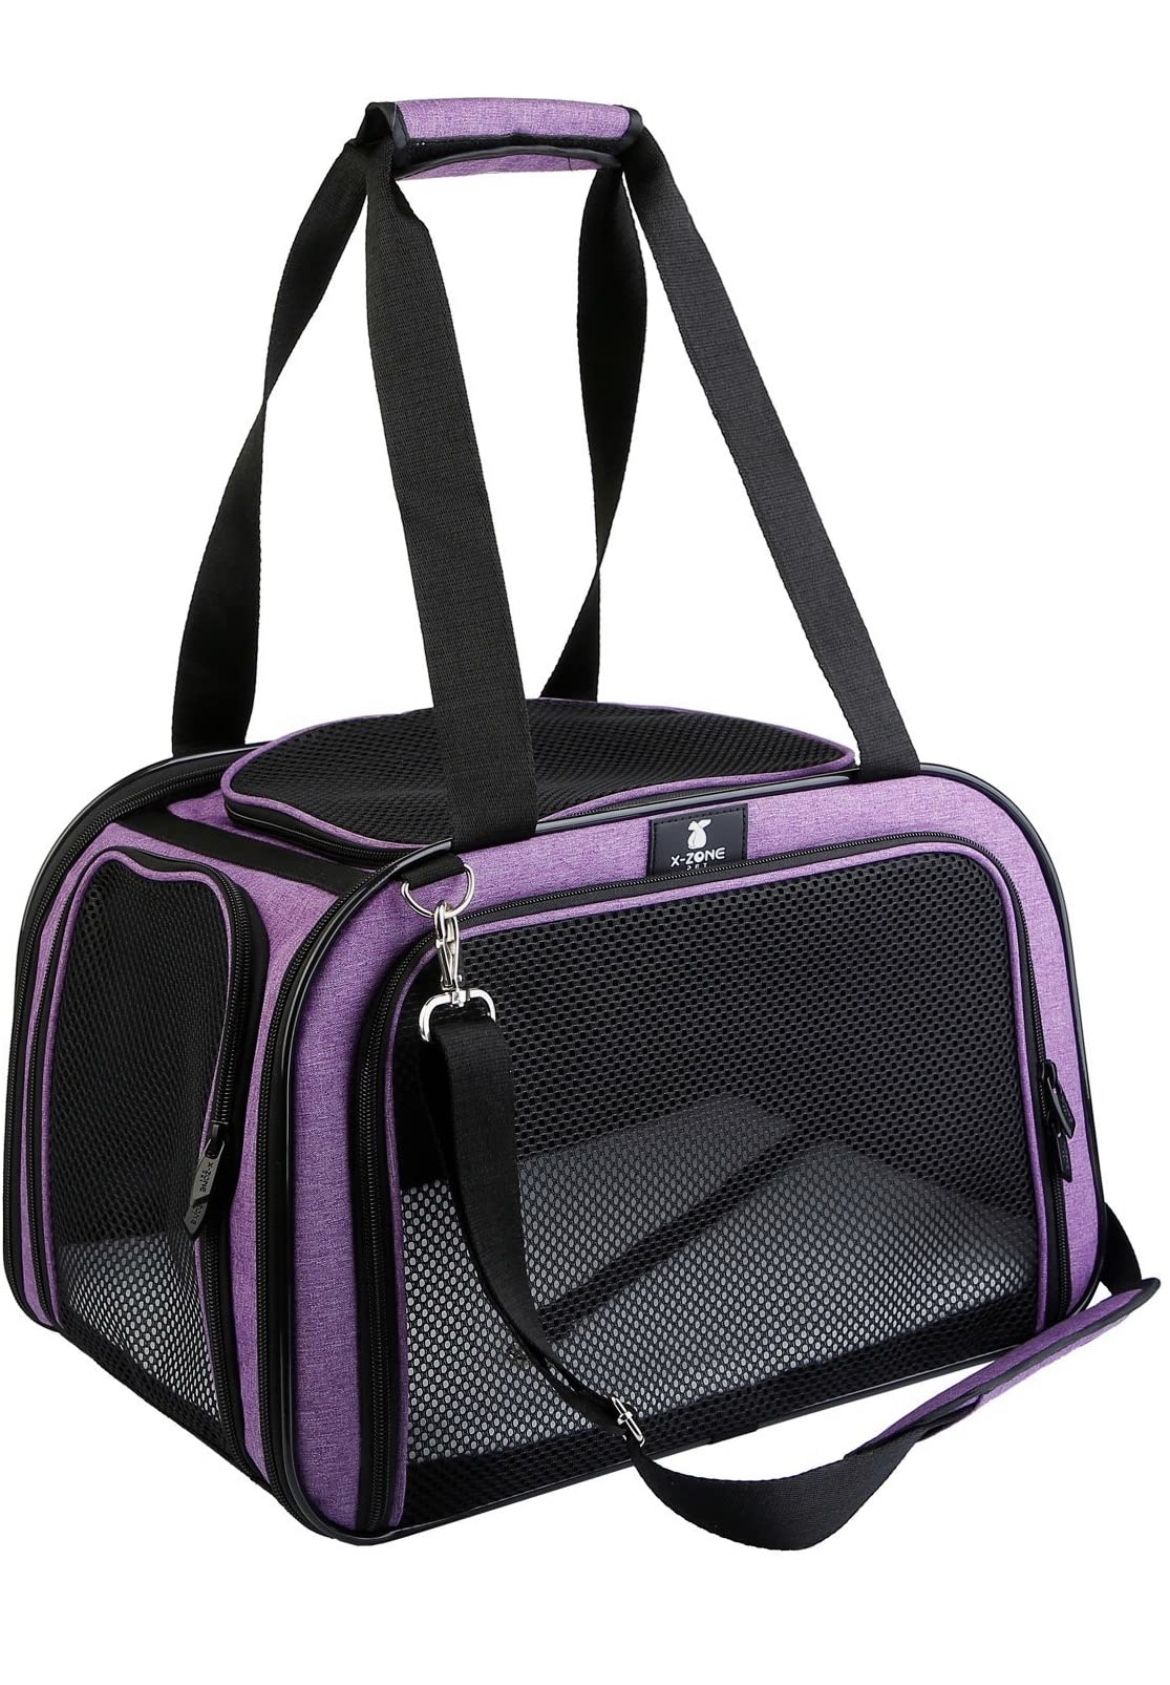  Pet Carrier for Dog and Cats, Airline Approved Soft-Sided Pet Travel Carrier,Portable Kennel for Puppies